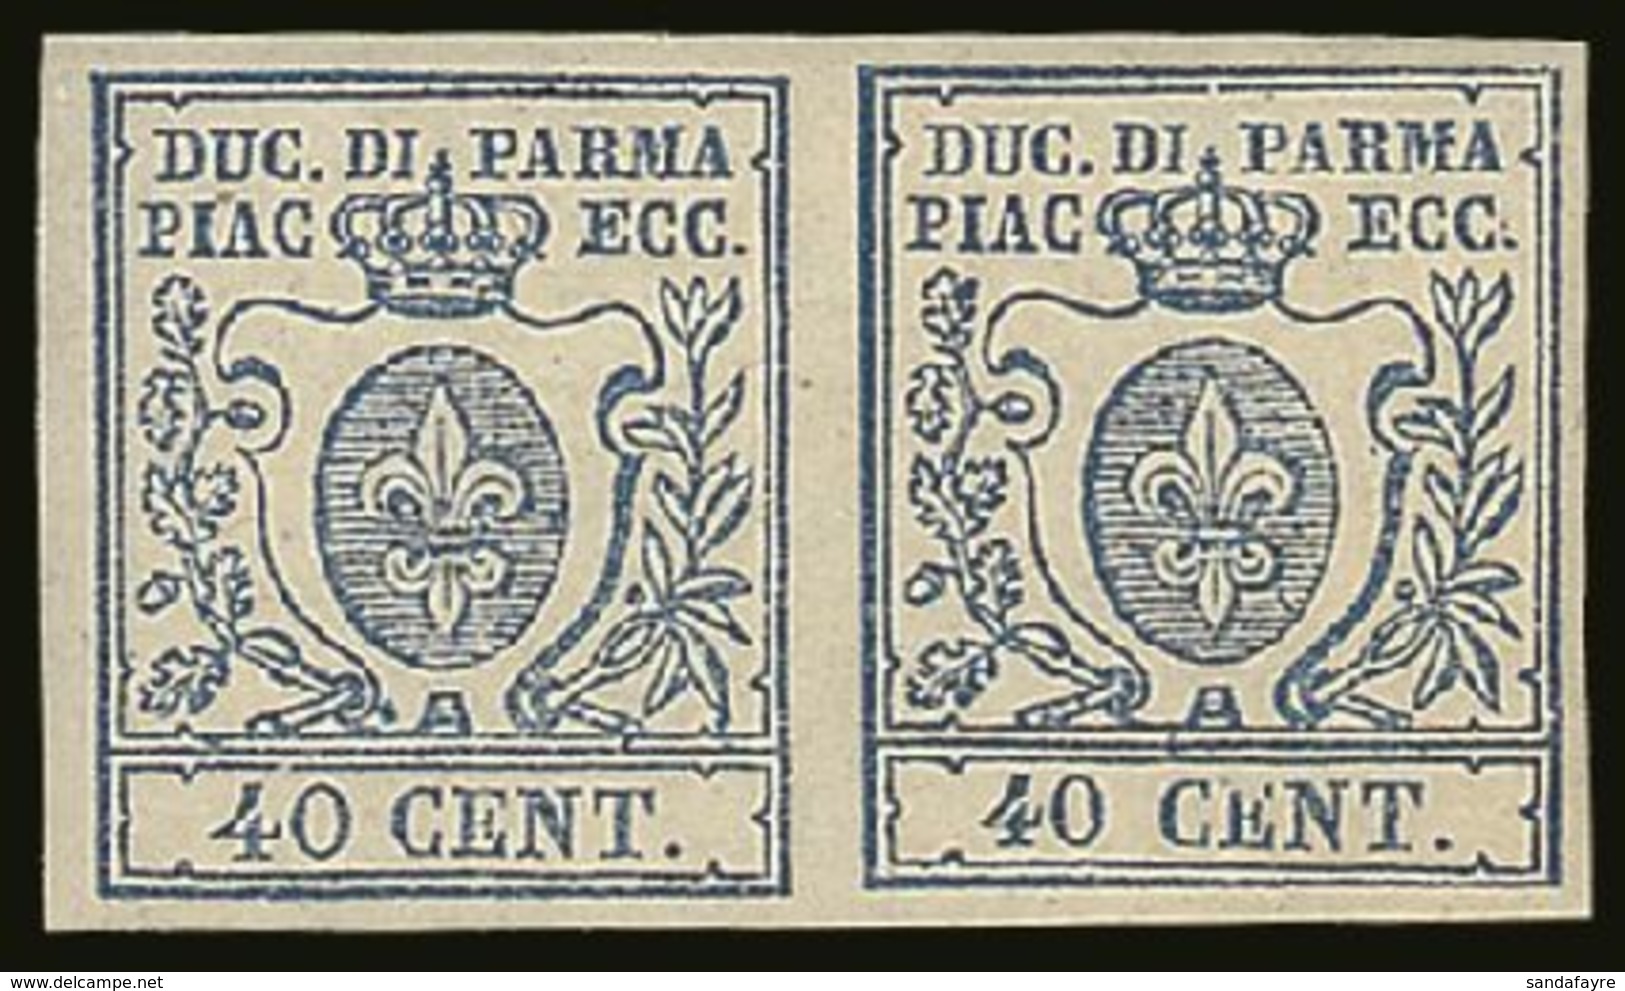 PARMA 1857 40c Blue "Fleur De Lys", Mint Pair One Showing The Variety "large 0 In 40", Sass 11d, Superb NHM. Signed Dien - Ohne Zuordnung